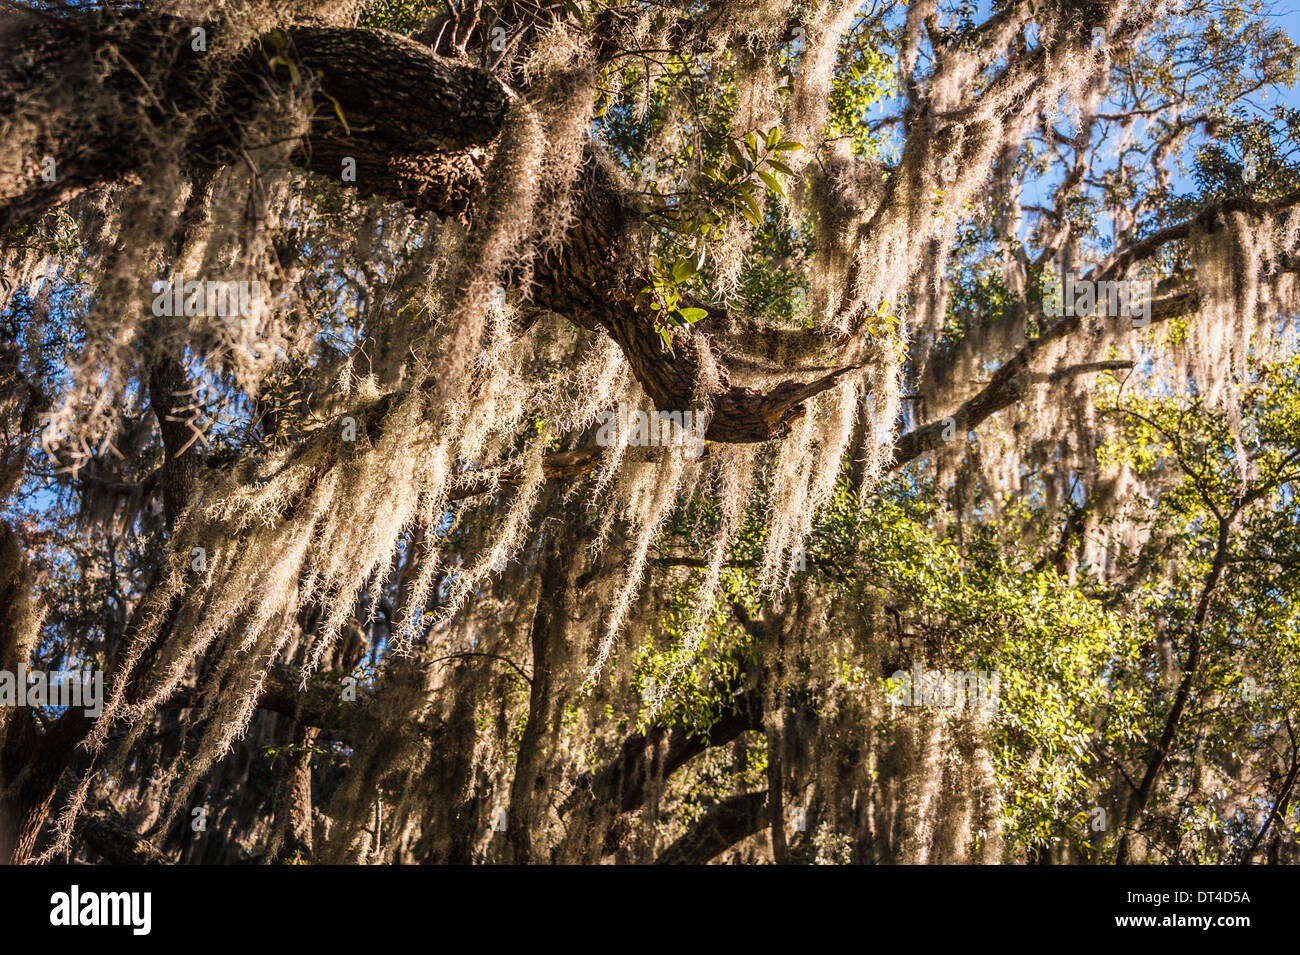 Spanish moss hanging from Southern Live Oaks in the Timucuan Preserve near Fort Caroline in Jacksonville, Florida. (USA) Stock Photo